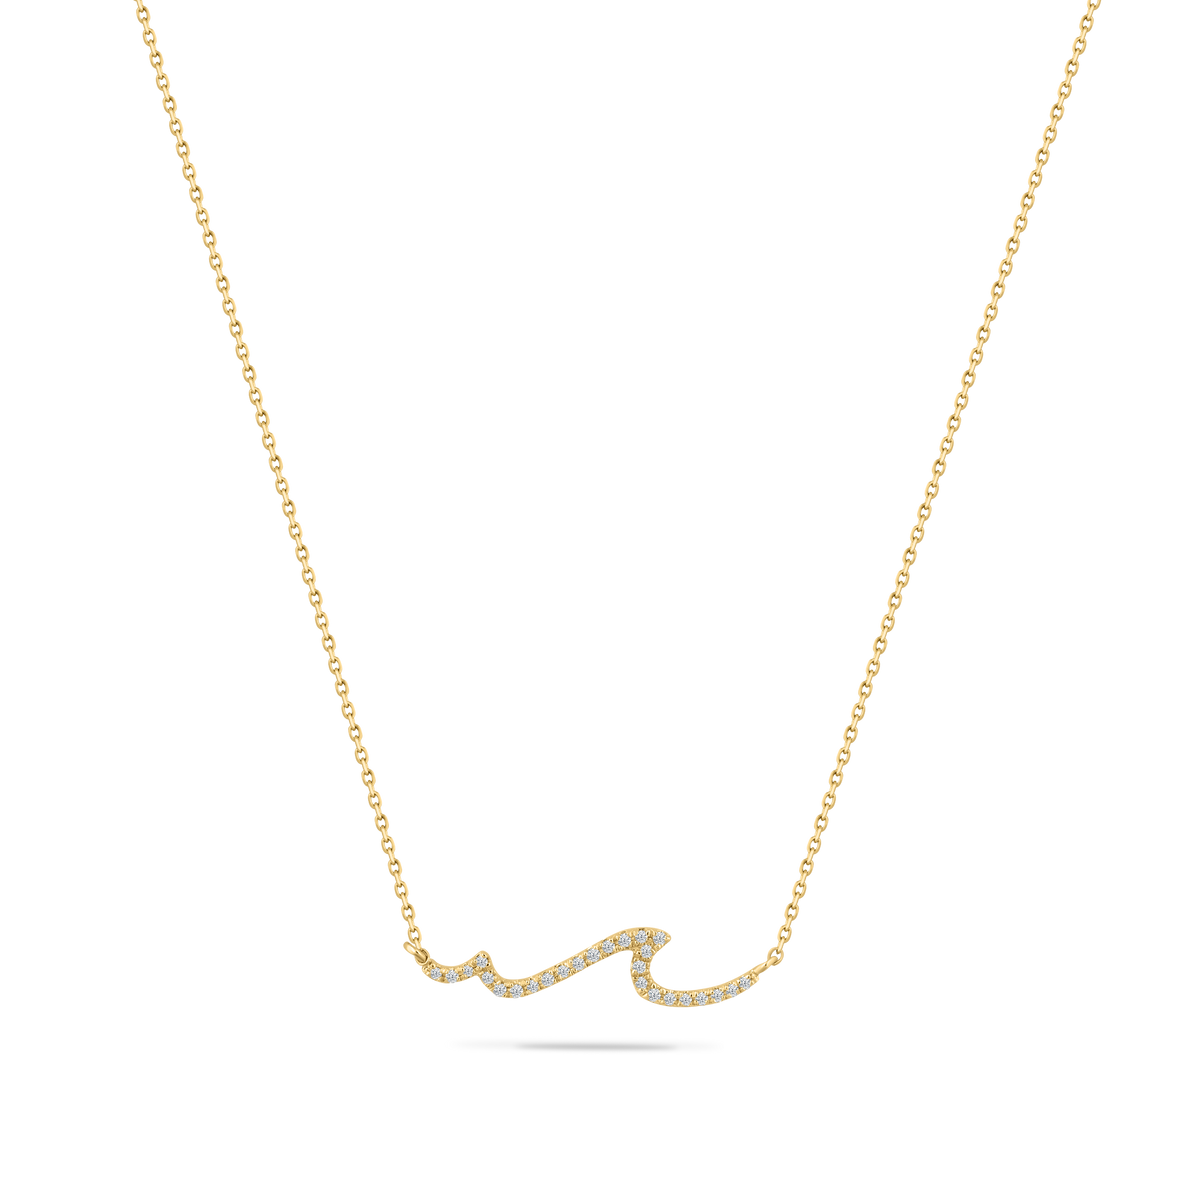 14K WAVE NECKLACE WITH 26 DIAMONDS 0.07CT ON 18 INCHES CABLE CHAIN